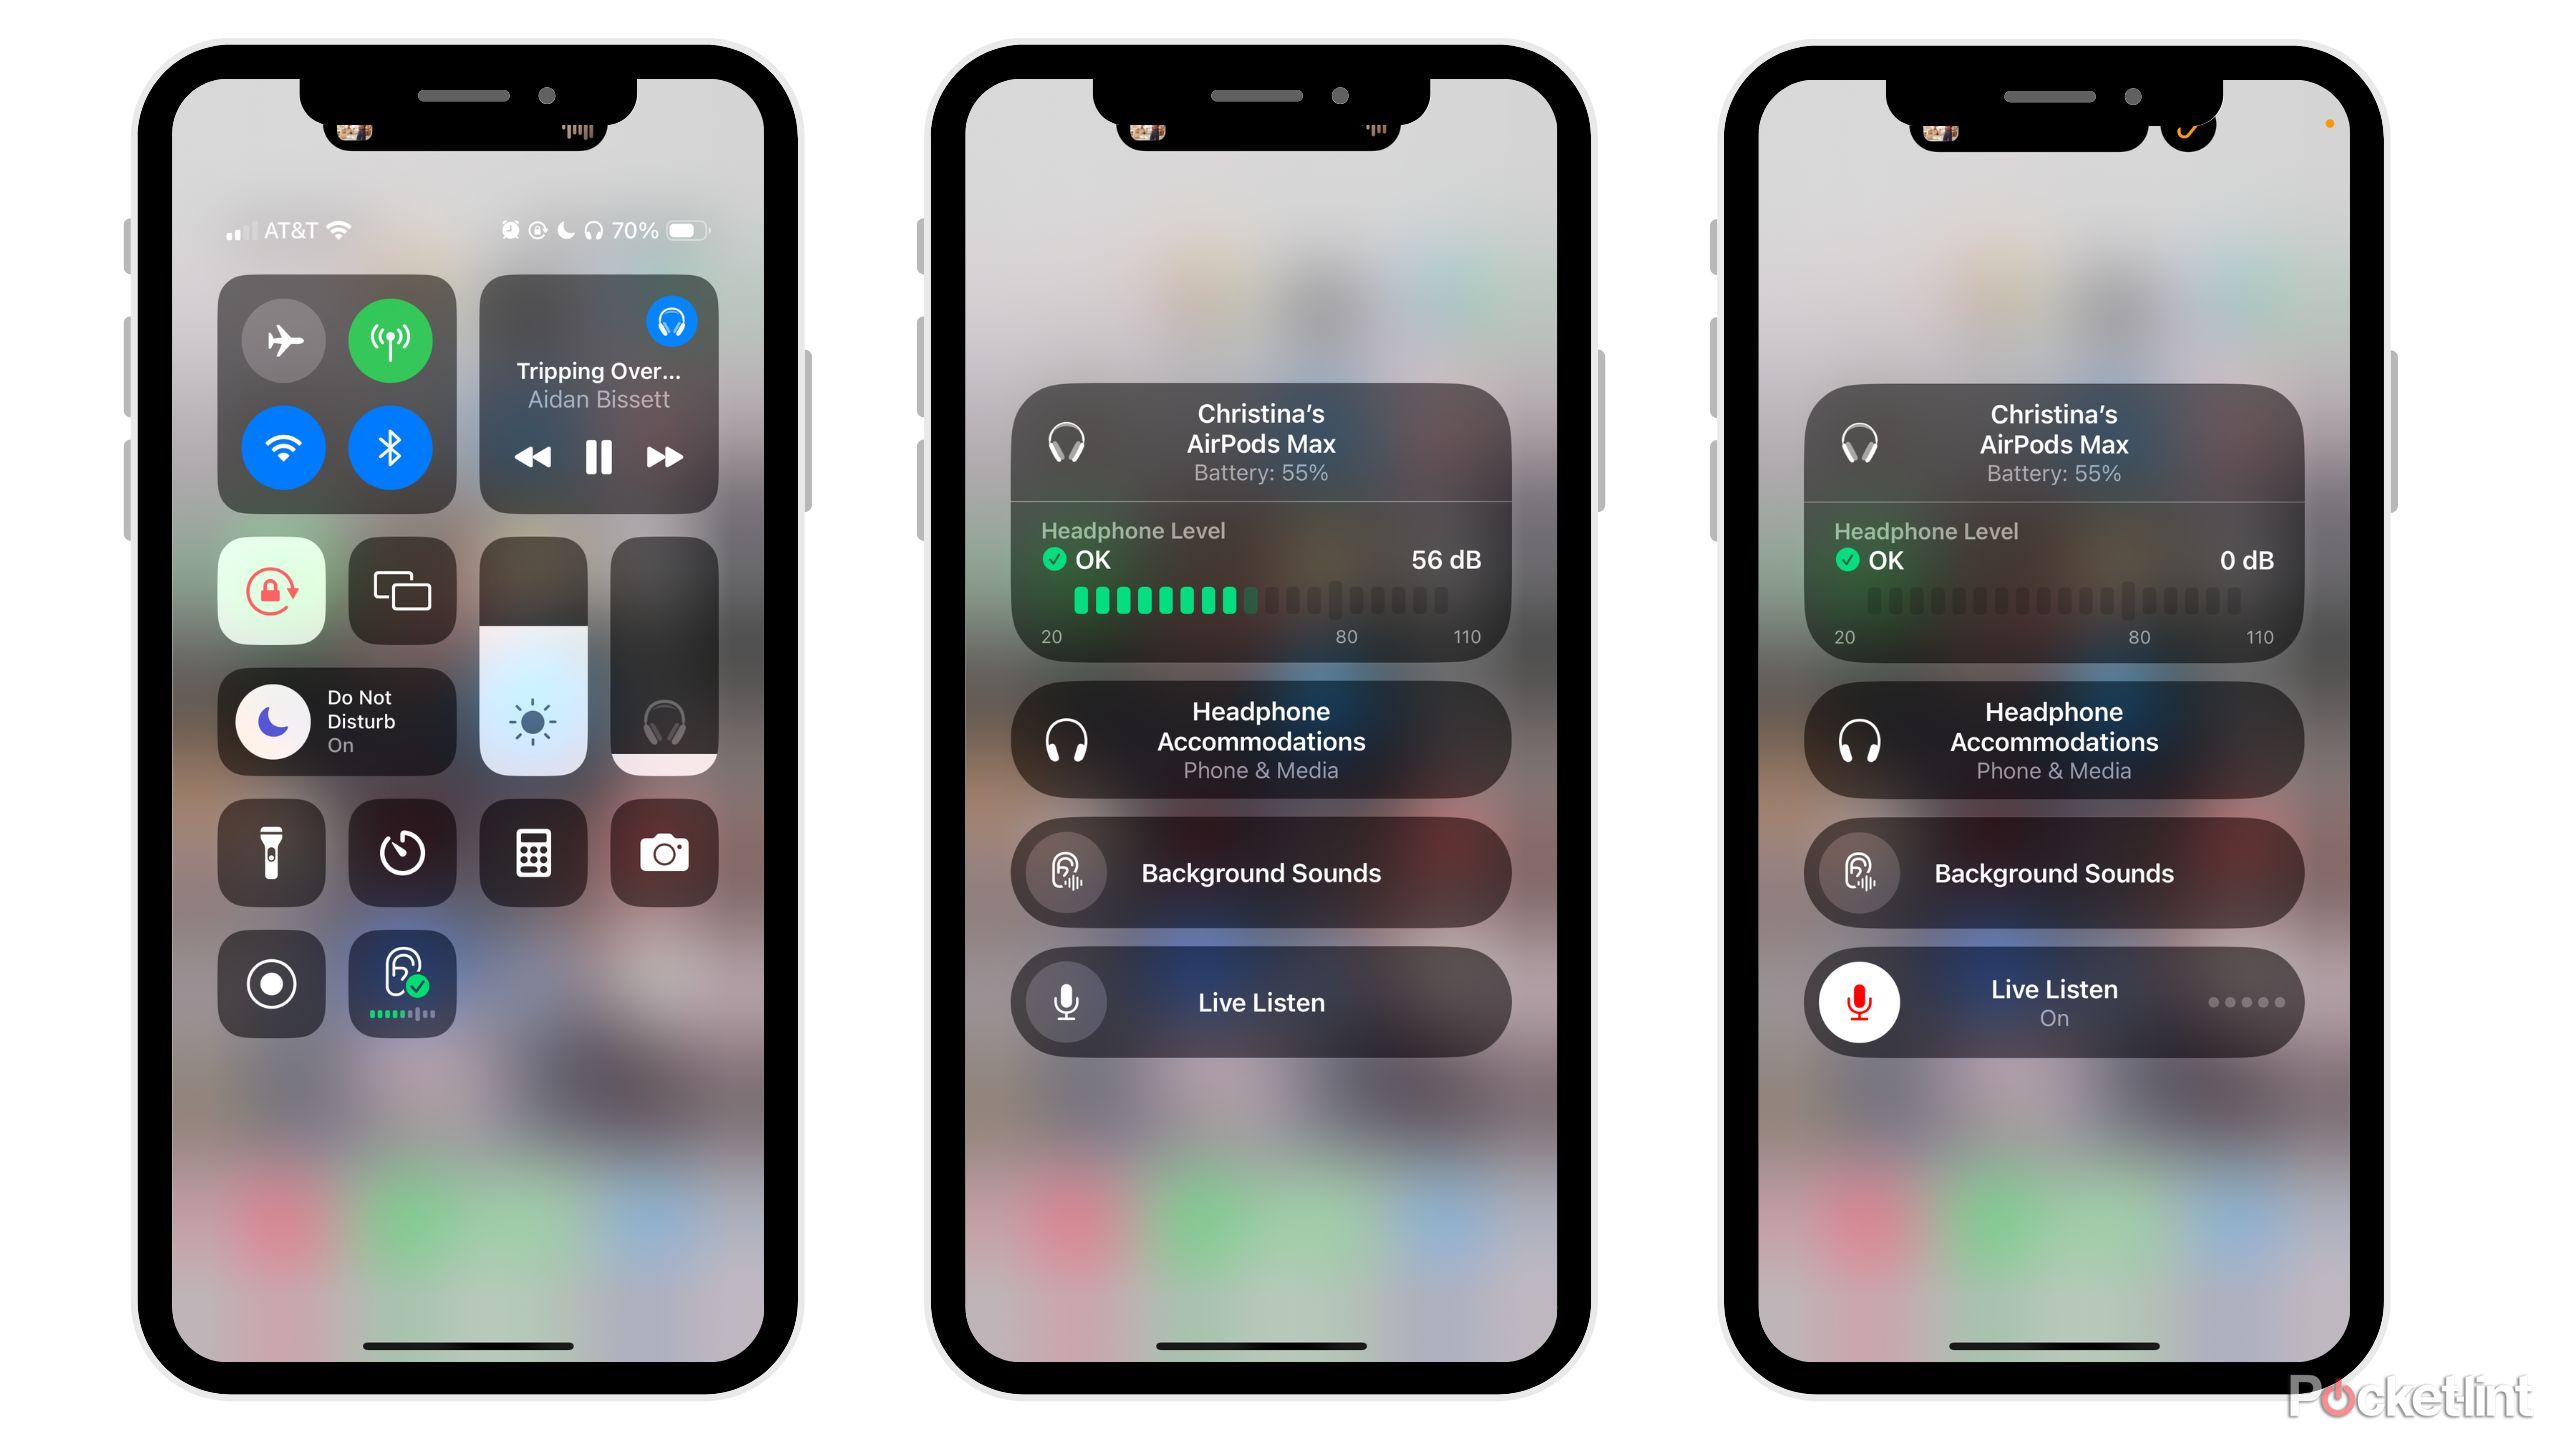 How to use Live Listen with AirPods Max on iPhone 